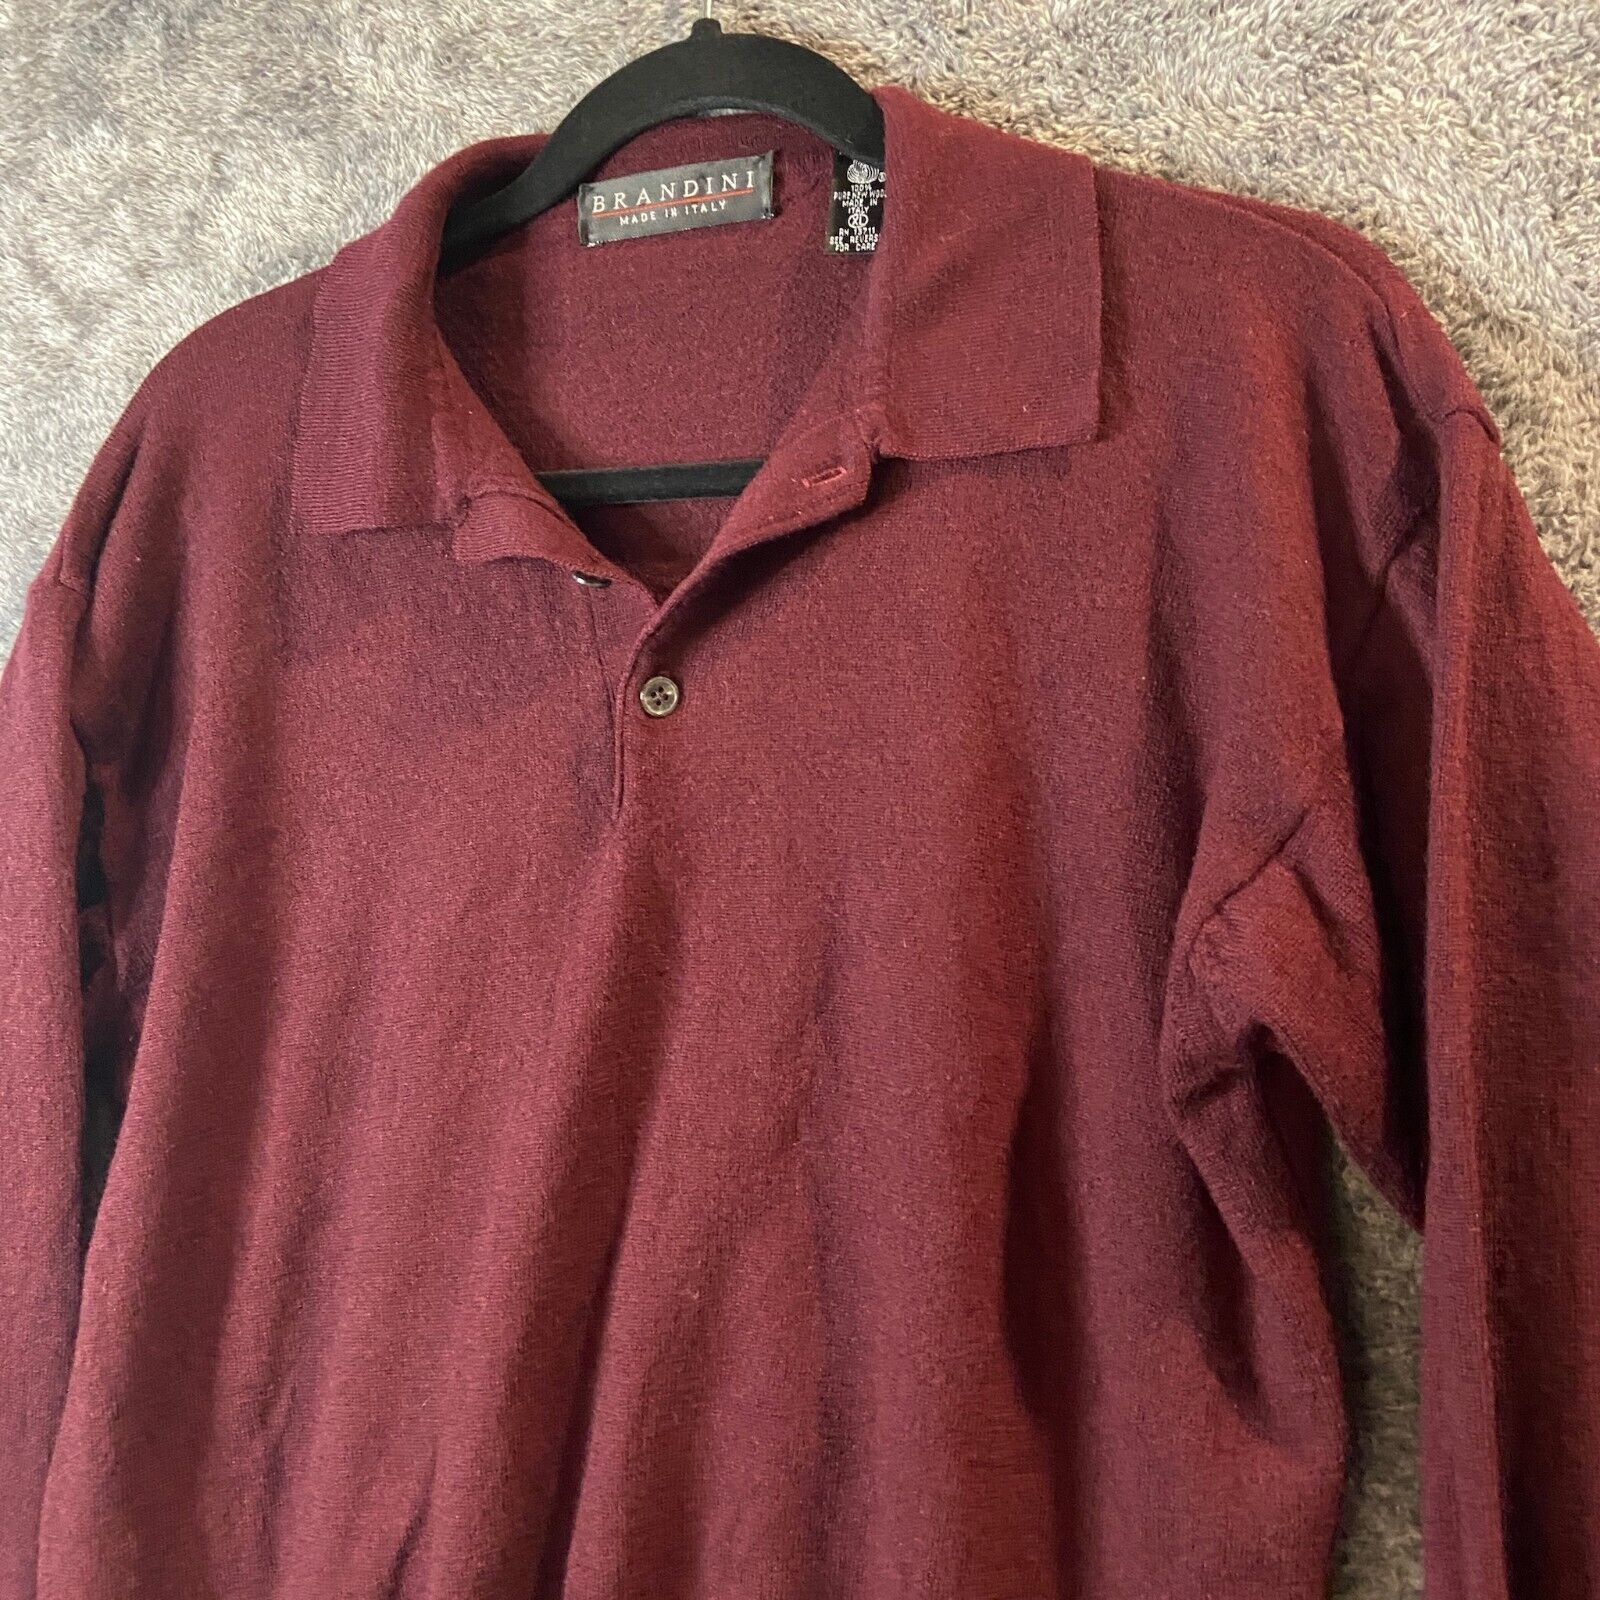 Primary image for Brandini Vintage Wool Sweater Mens Extra Large Maroon Made in Italy Merino Soft